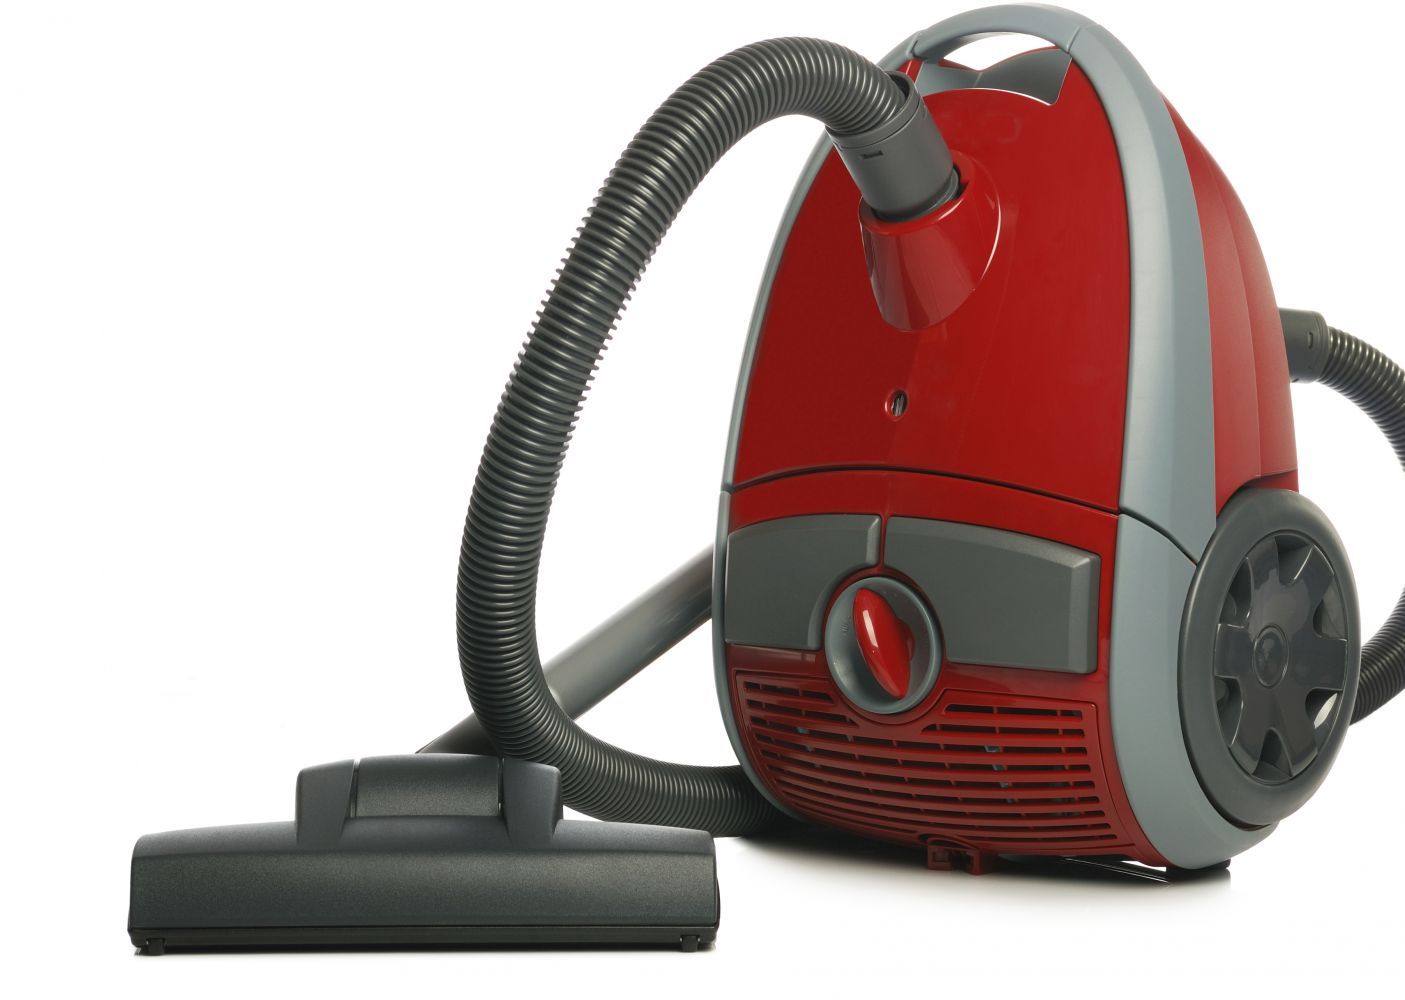 Large range of used appliances including vaccuum cleaners in Anchorage, AK